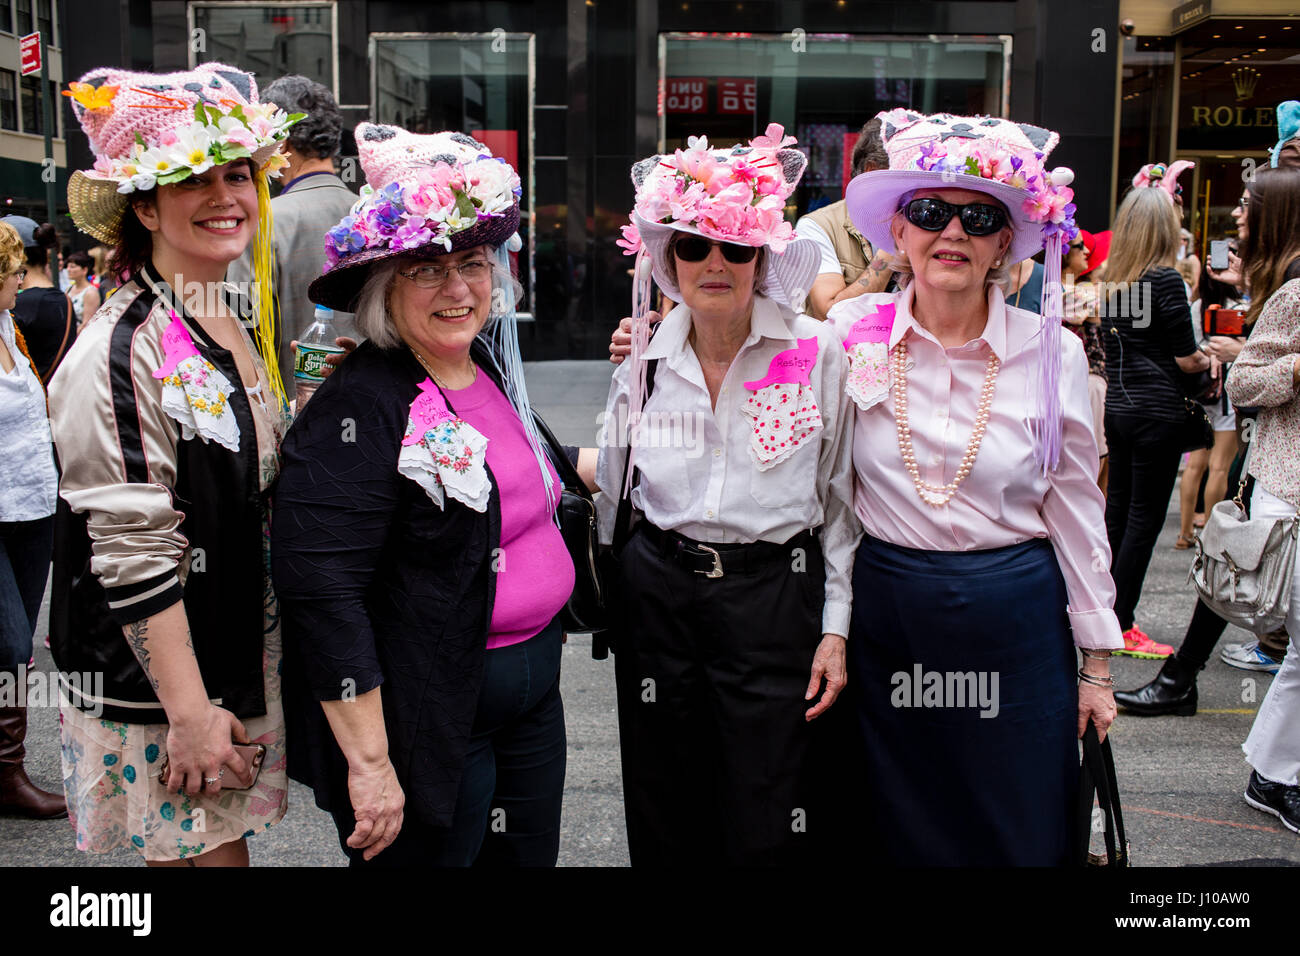 New York, USA. 16th Apr, 2017. Four women wearing hats that incorporate ...